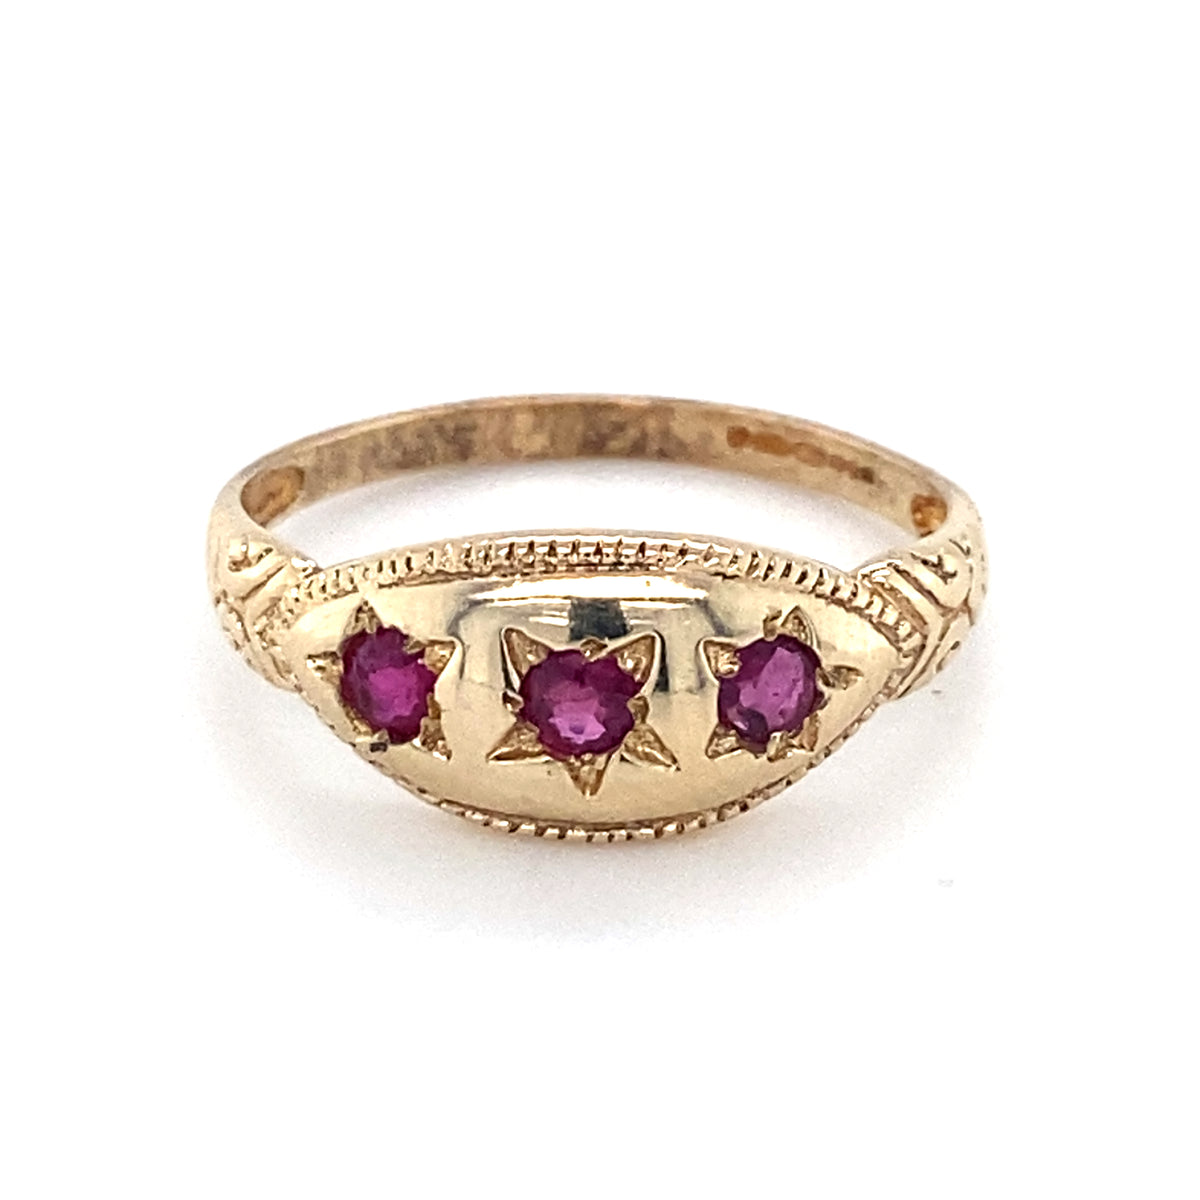 Antique 9kt Gold Three Stone Ruby Ring